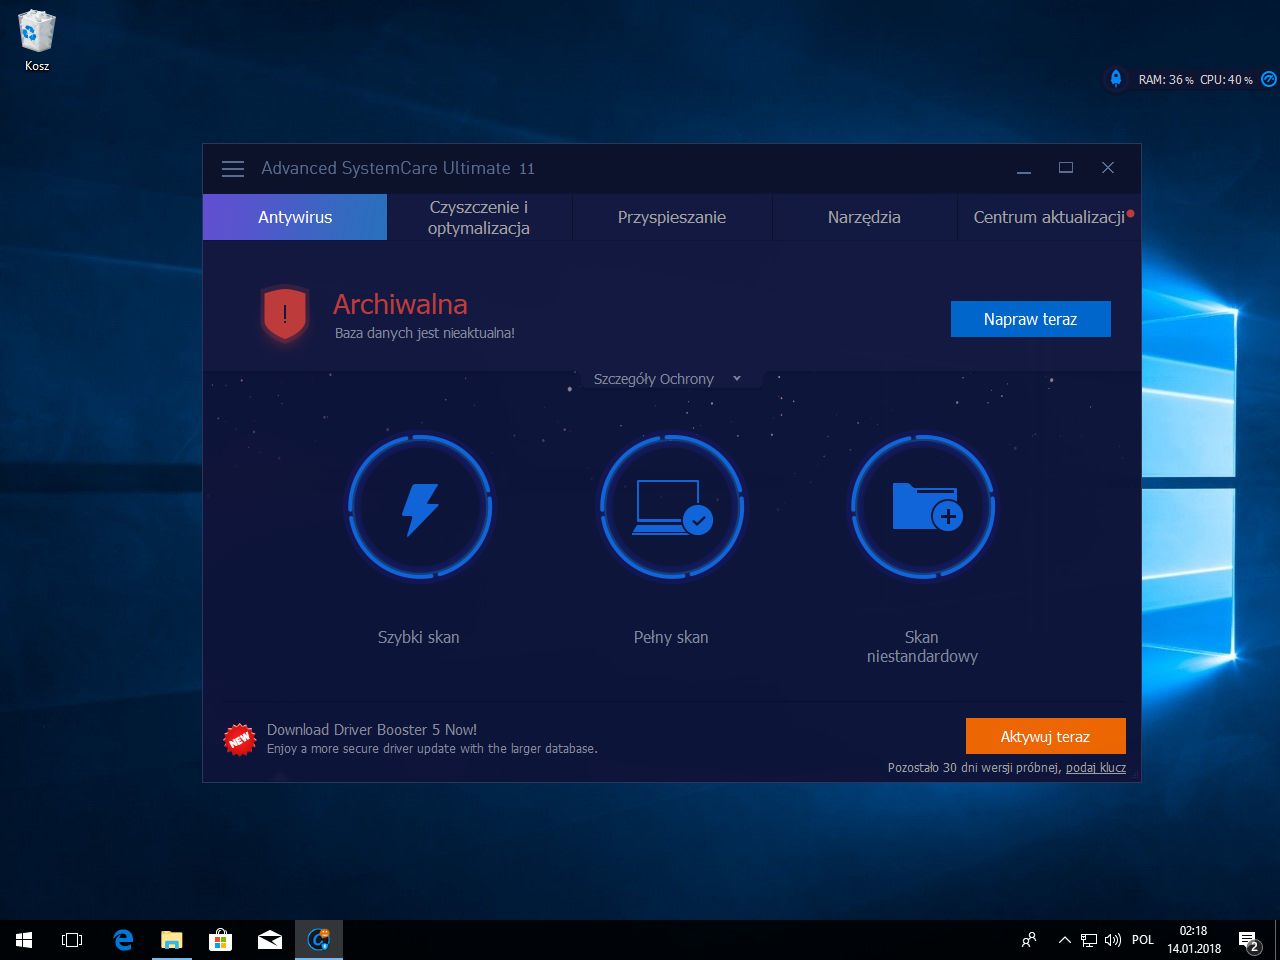 for windows download Advanced SystemCare Pro 16.5.0.237 + Ultimate 16.1.0.16